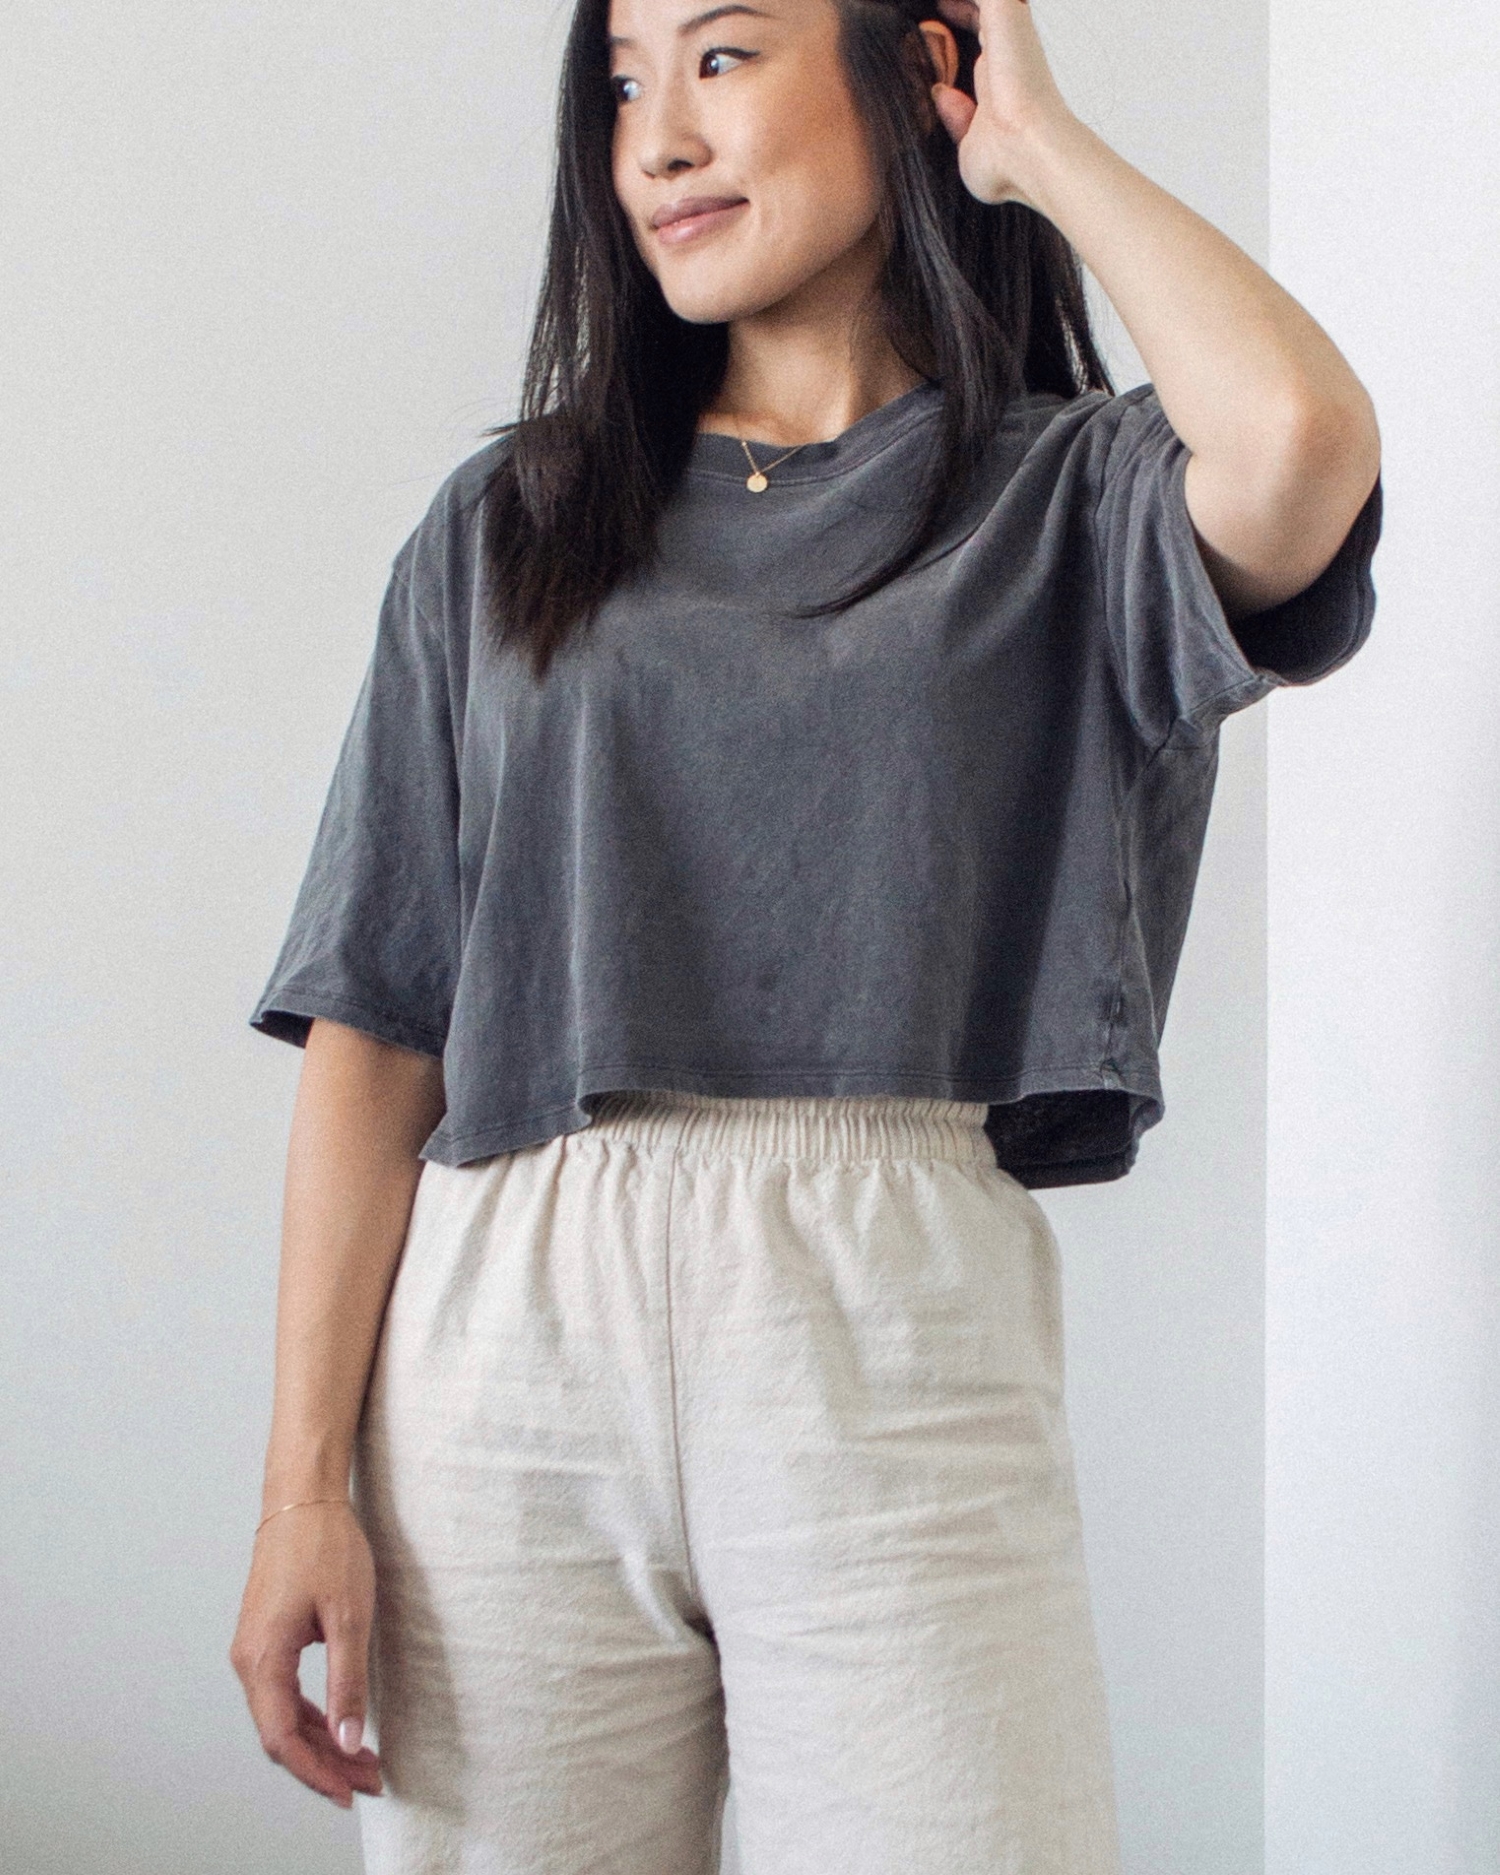 My Best Simple Summer Outfits: What I Wore Lately - Her Simple Sole